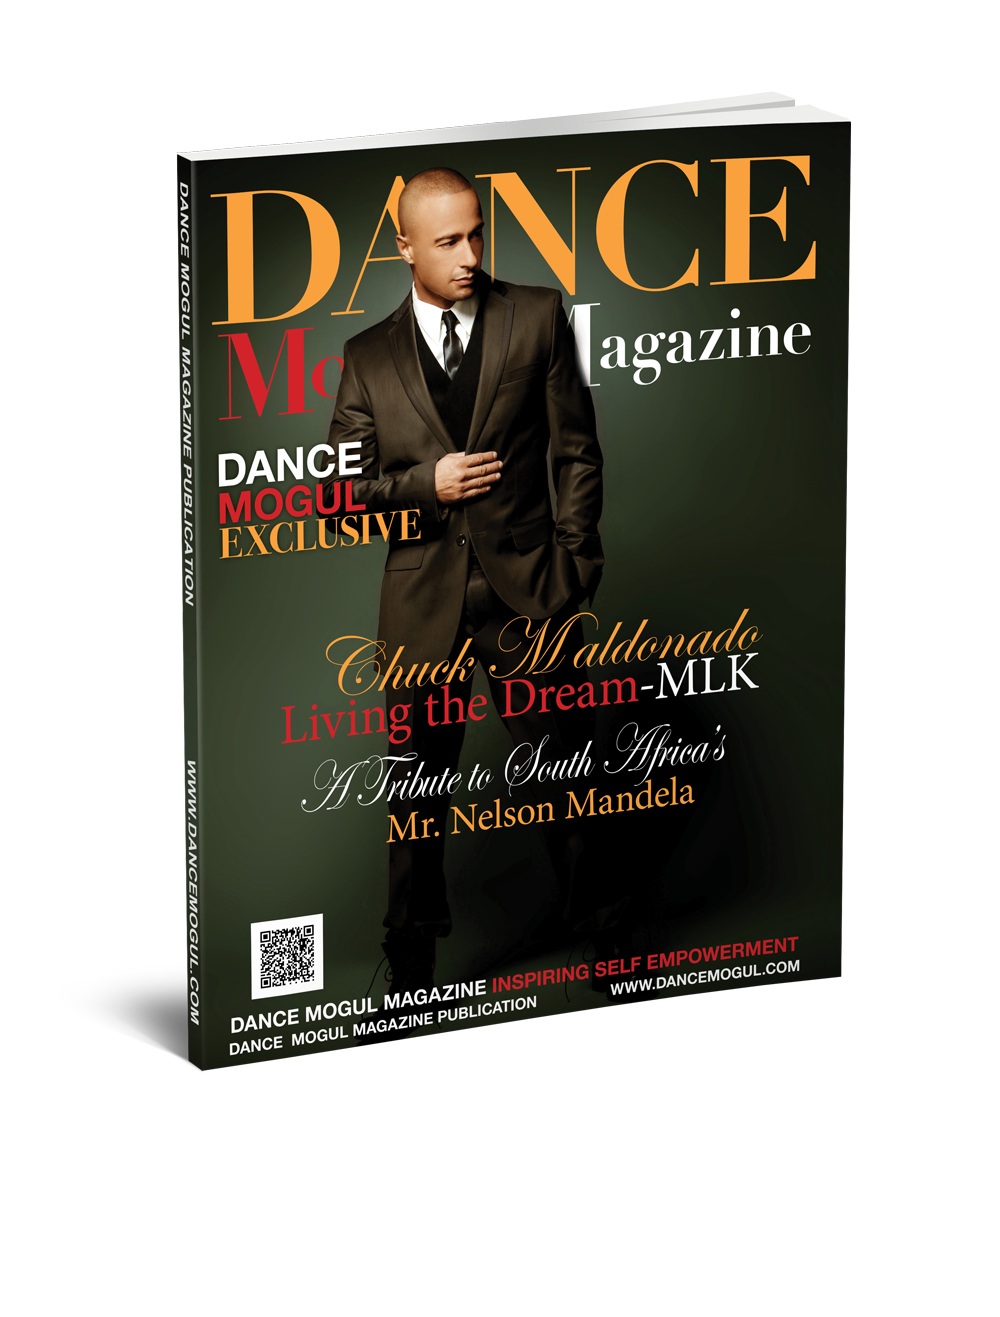 Dance Mogul Magazine Cover and Feature story.